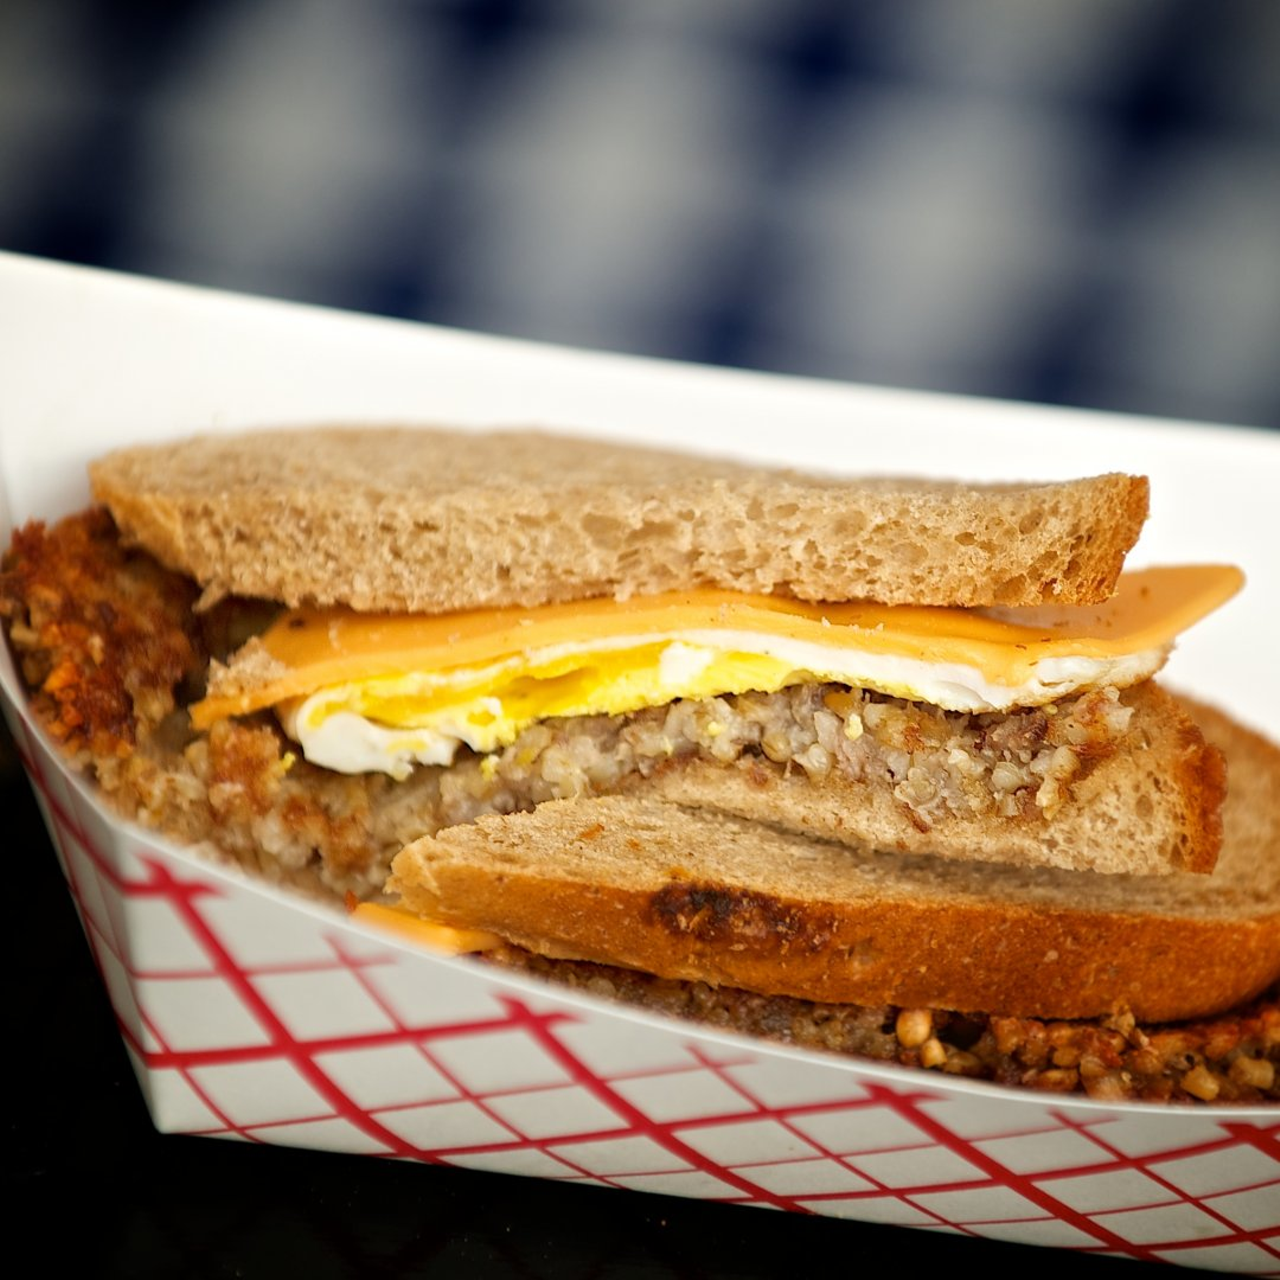 Goetta, egg and cheese on a sandwich